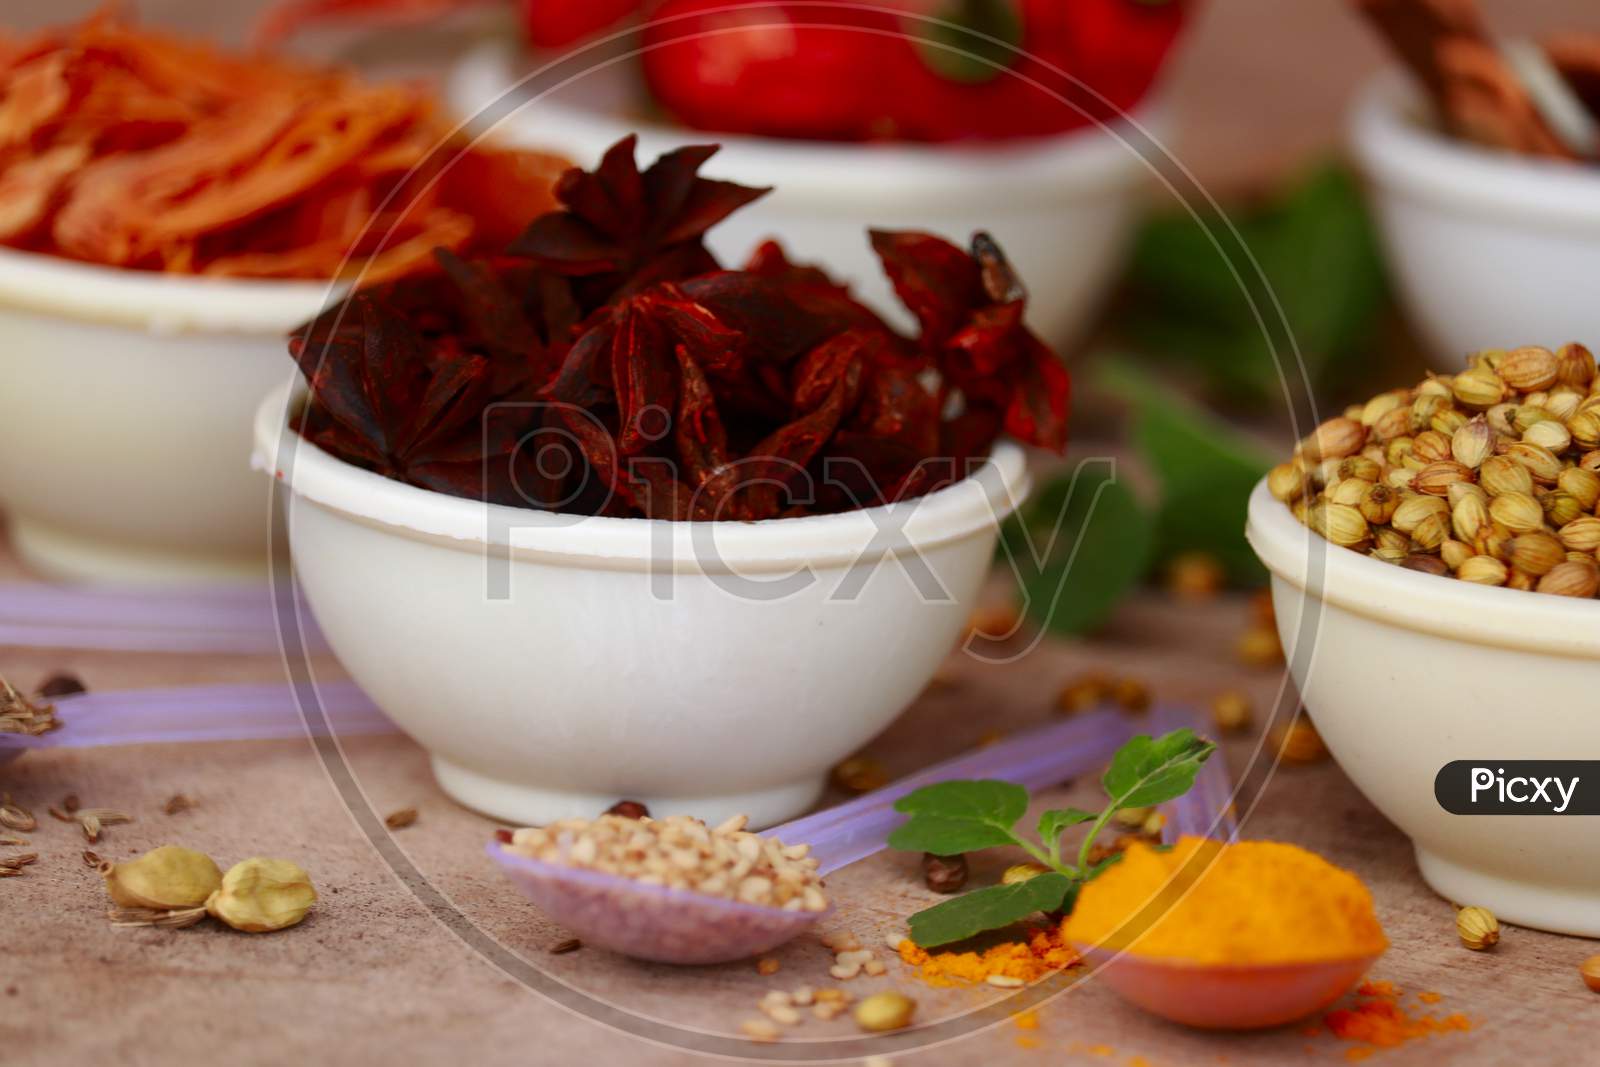 Spices And Herbs In White Bowls, Spice In Small Spoon,Food And Cuisine Ingredients,Various Spices Collection,Food Background,Turmeric, Star Anise,Mace,Cloves